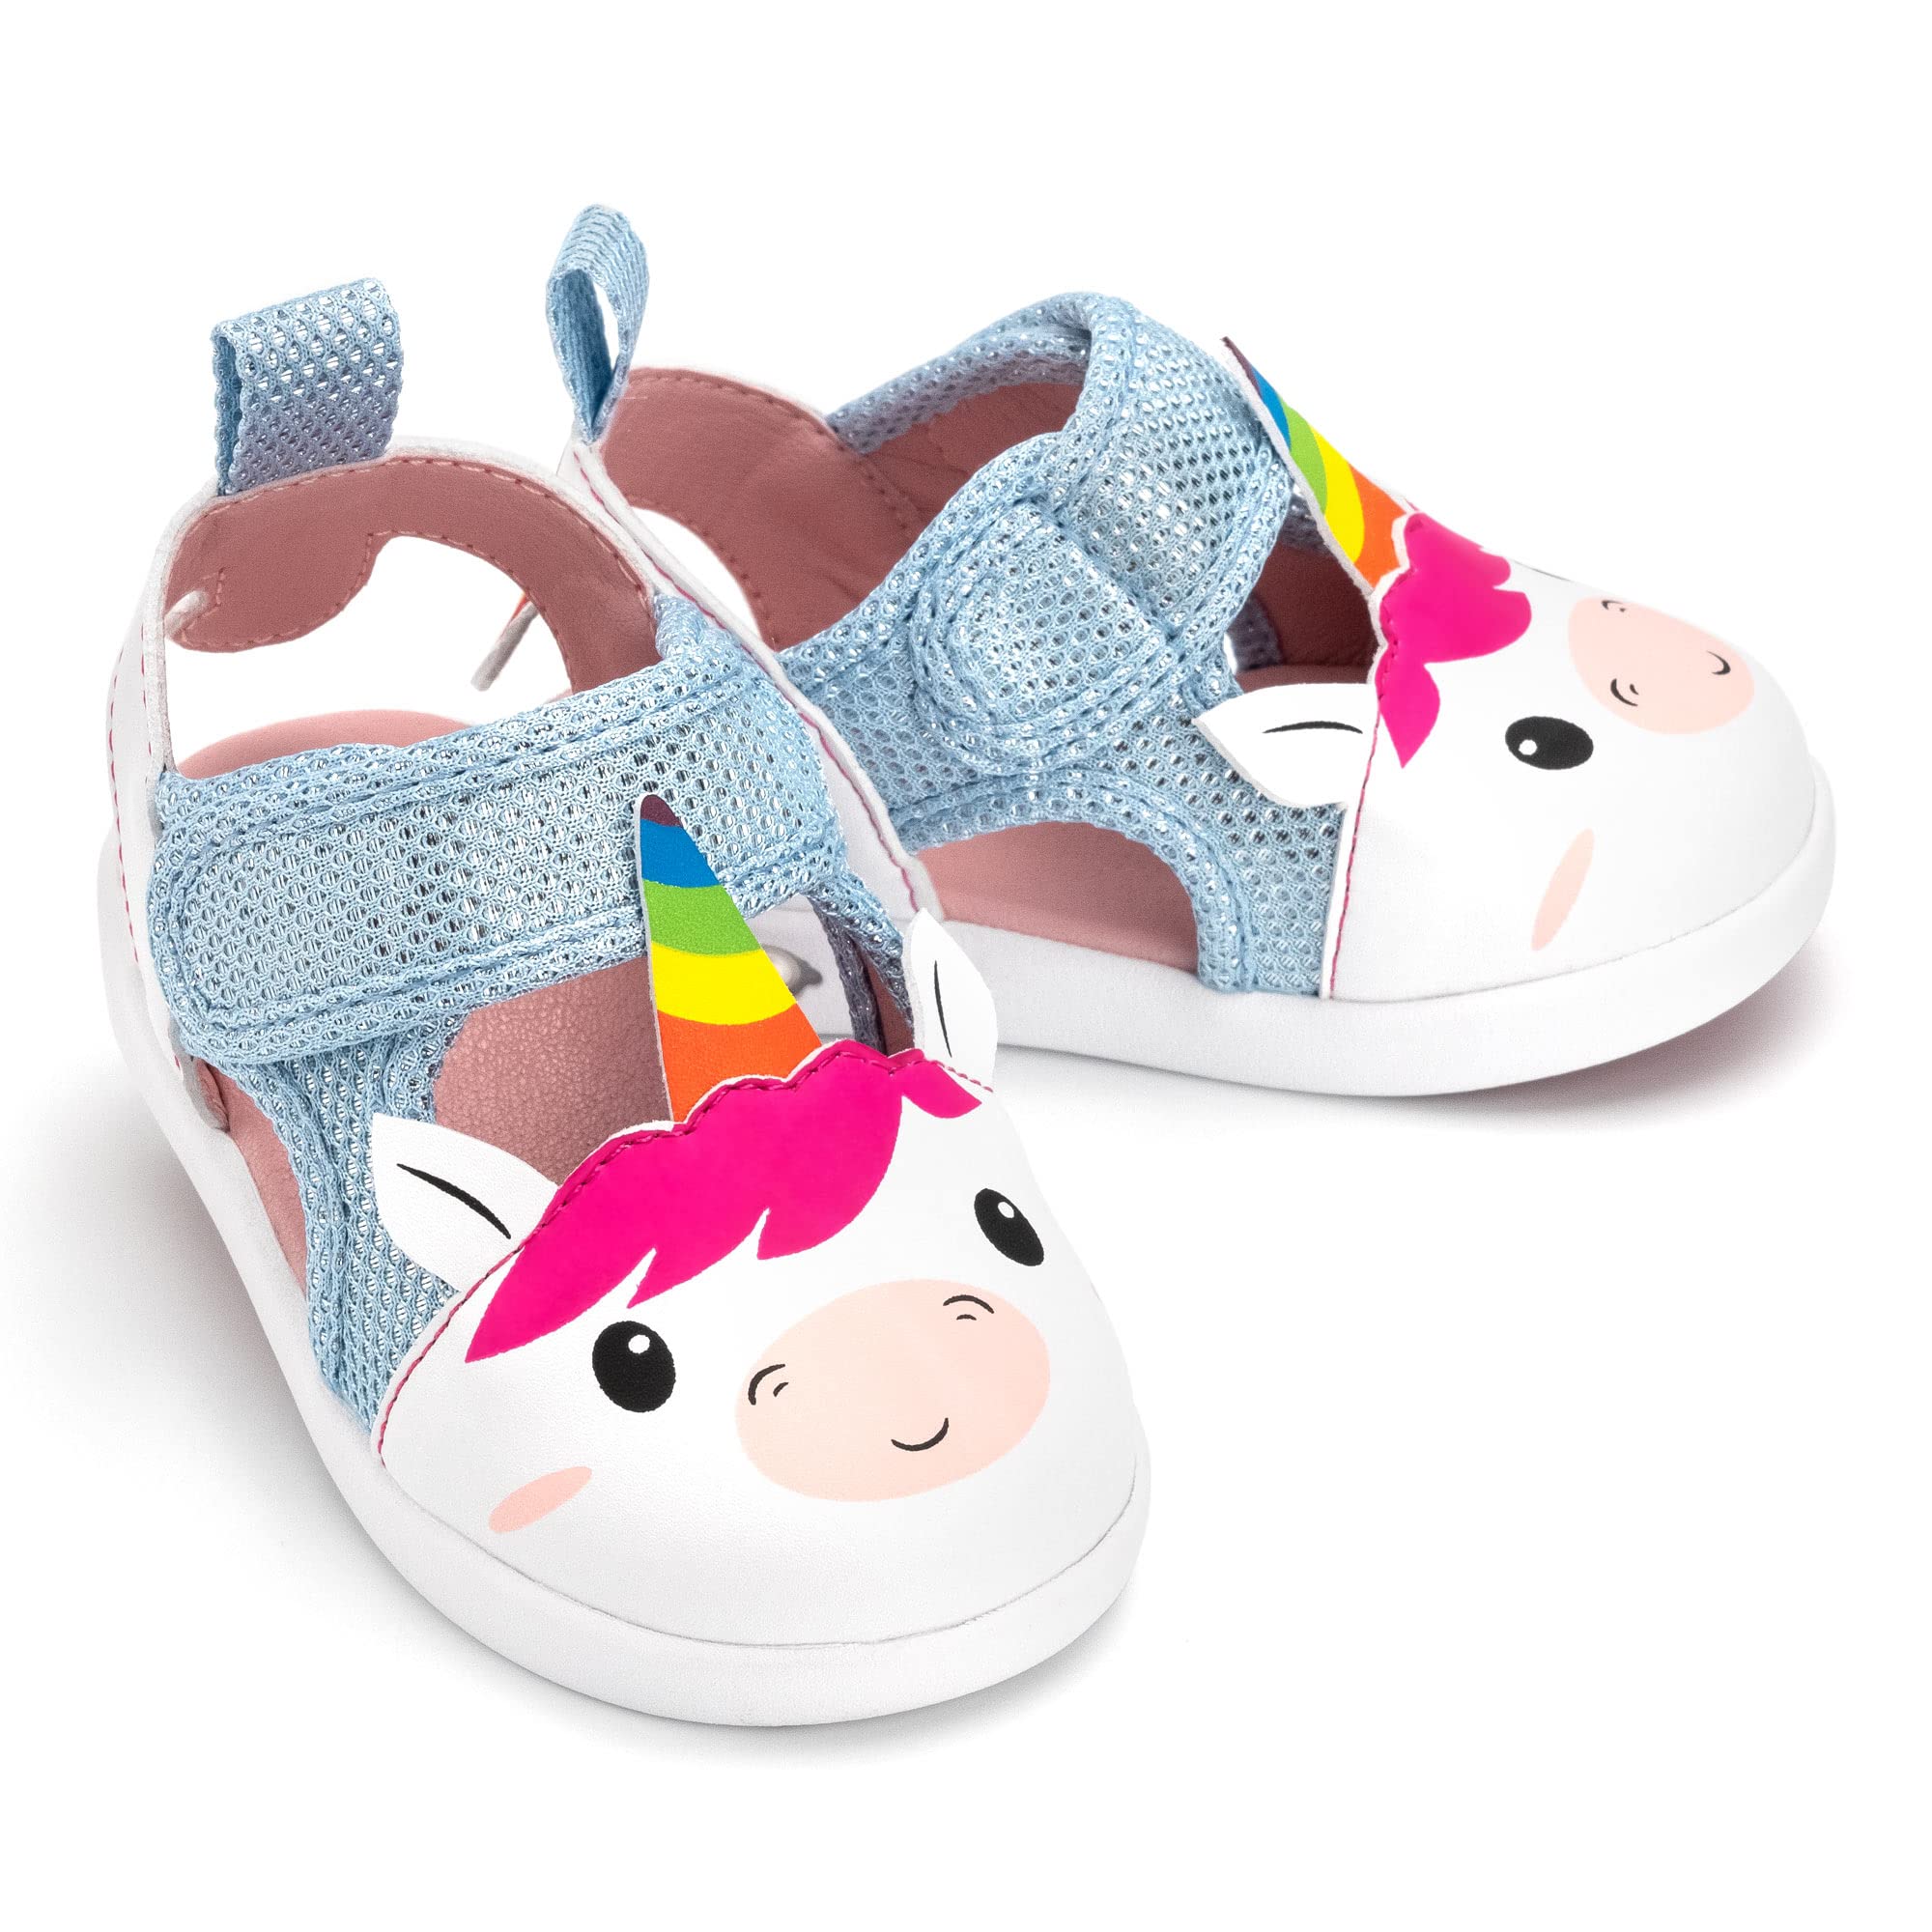 ikiki Squeaky Sandals for Kids with On/Off Squeaker Switch